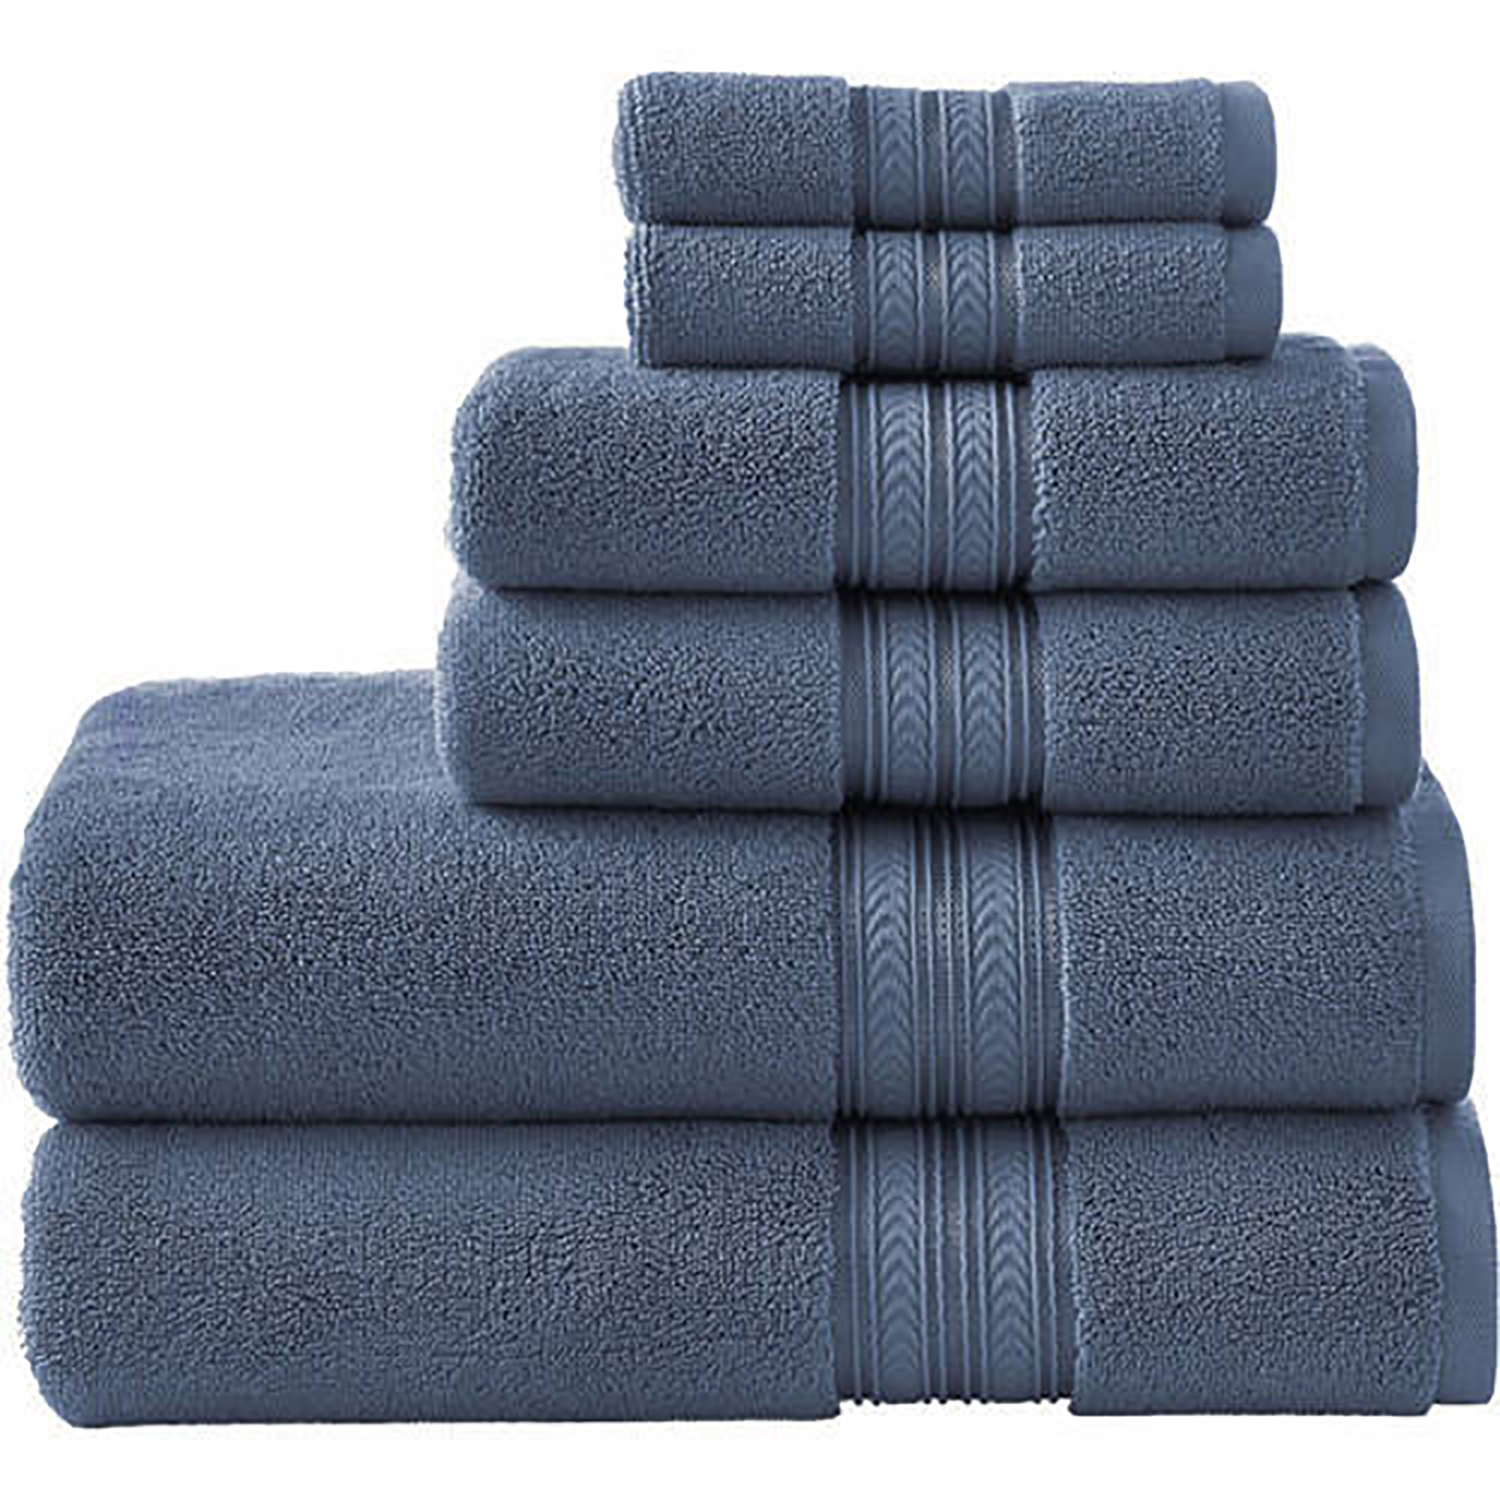 Insignia Blue 6PC Bath Towel Set, Better Homes & Gardens Thick and Plush Collection - image 1 of 5